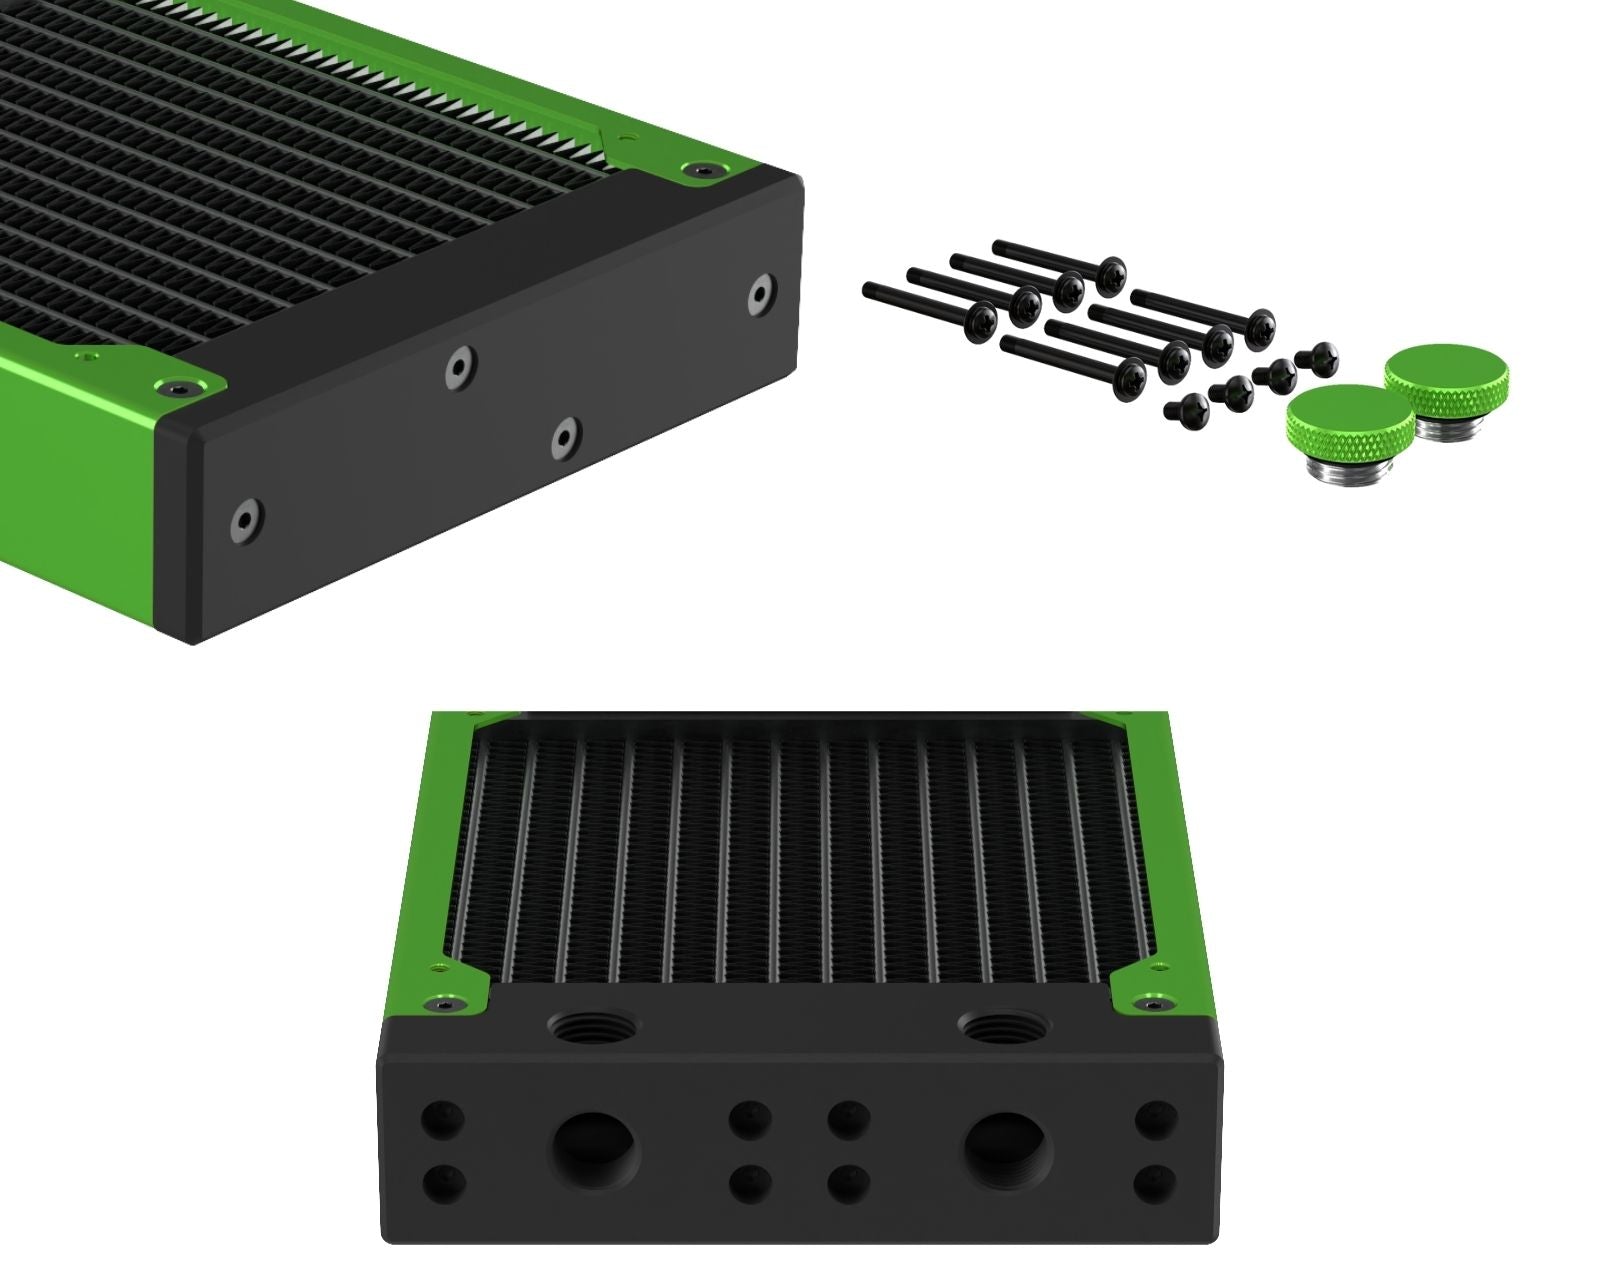 PrimoChill 240SL (30mm) EXIMO Modular Radiator, Black POM, 2x120mm, Dual Fan (R-SL-BK24) Available in 20+ Colors, Assembled in USA and Custom Watercooling Loop Ready - Toxic Candy